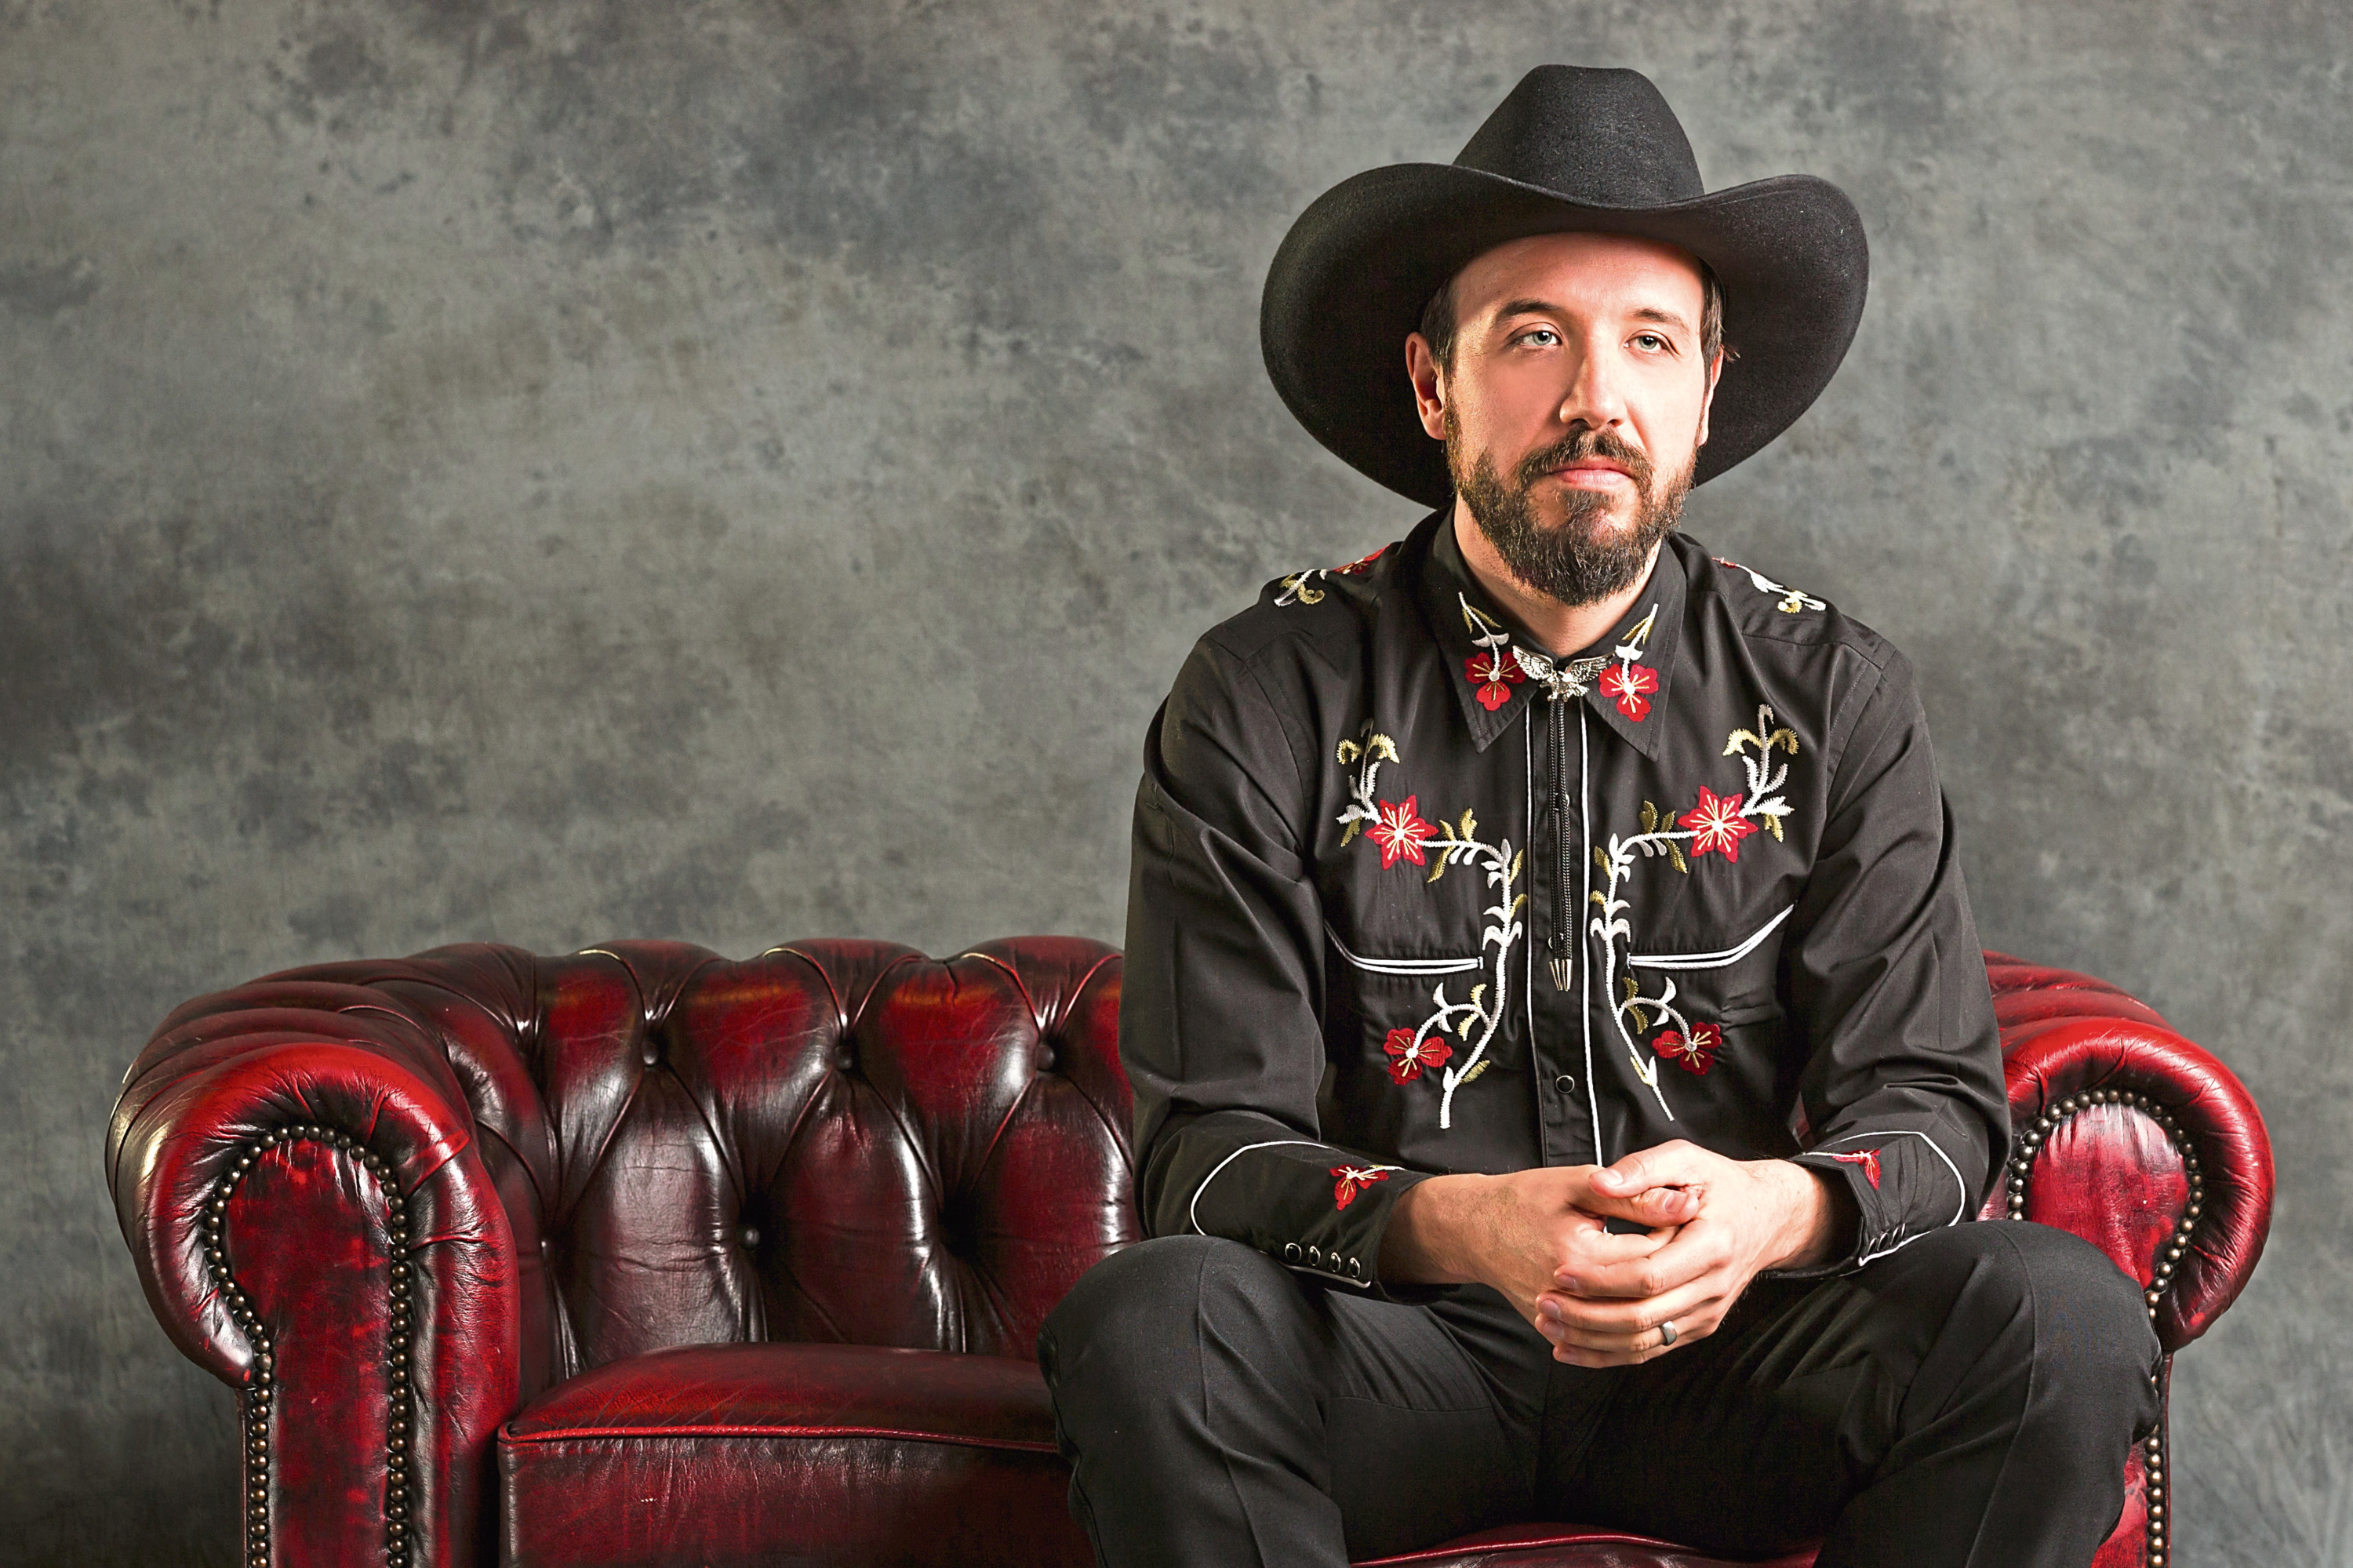 Chris Grahamson plays the country legend Willie – or could it be Garth Brooks? Photographs by Scott Rylander